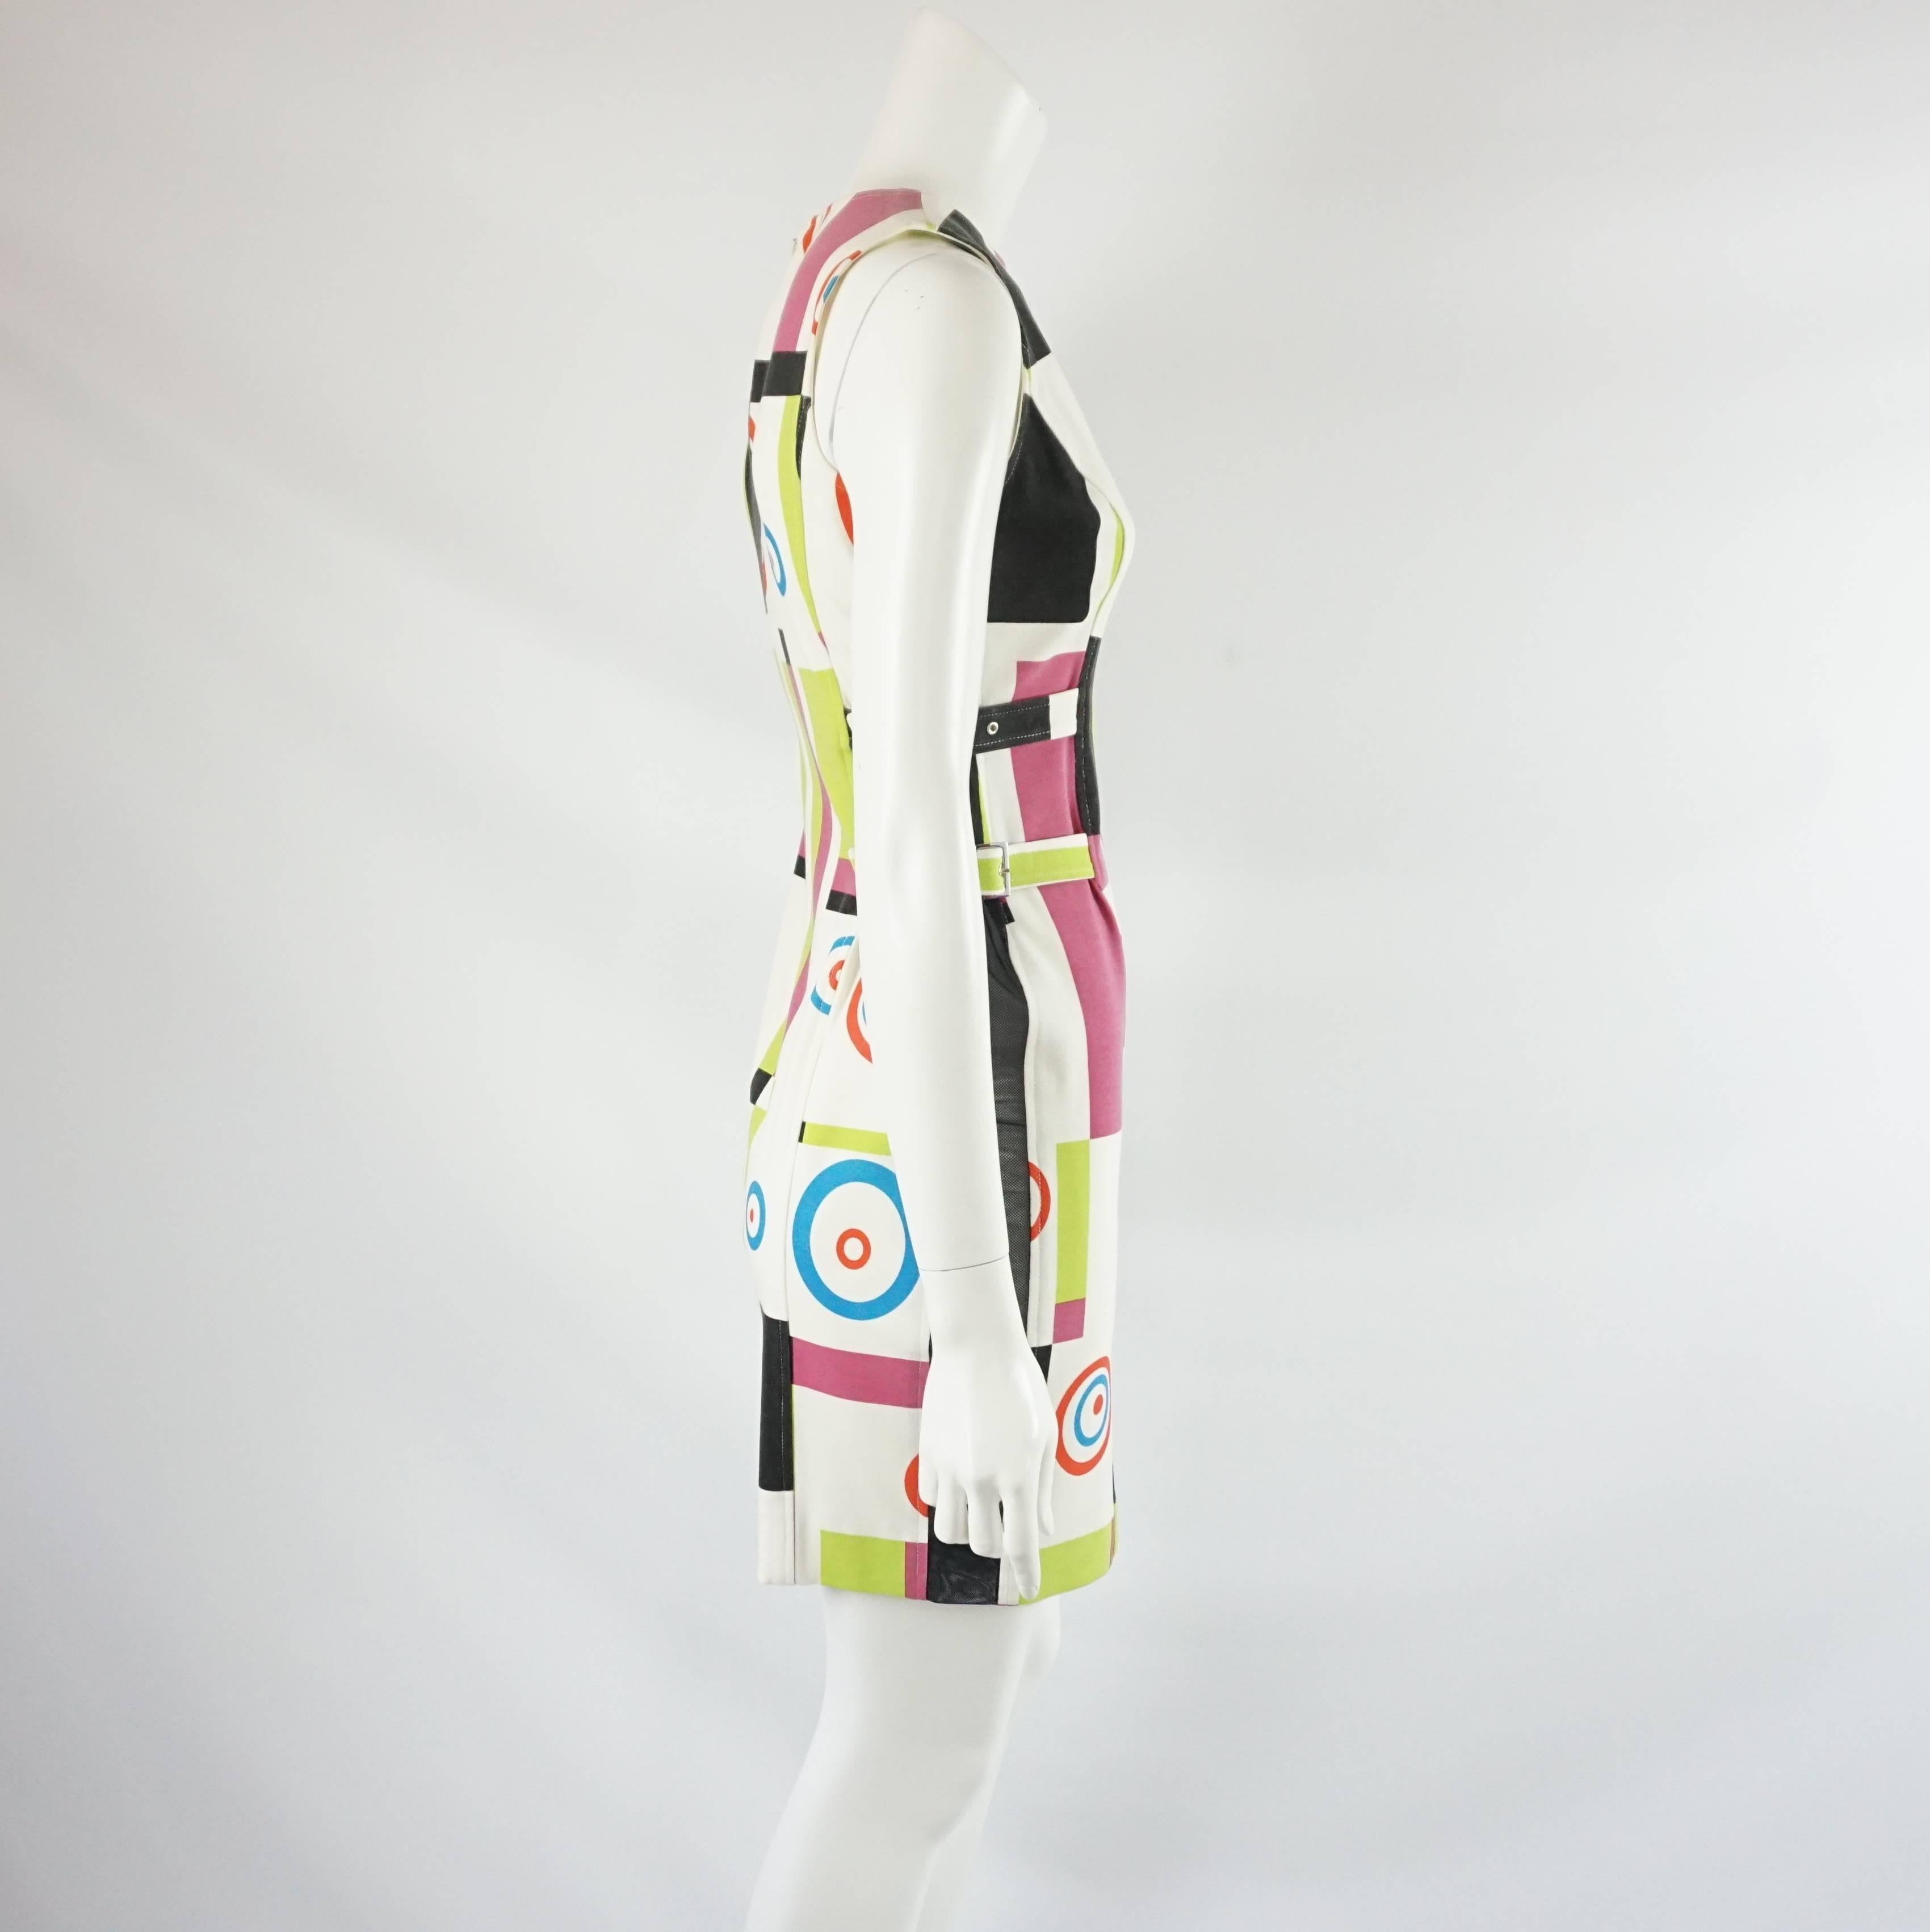 This Charles Jourdan dress is made of cotton and has a white and multi-color abstract print on it. The dress is sleeveless and tapered with mesh paneling on both sides and two small belts on each side. The dress is in very good vintage condition